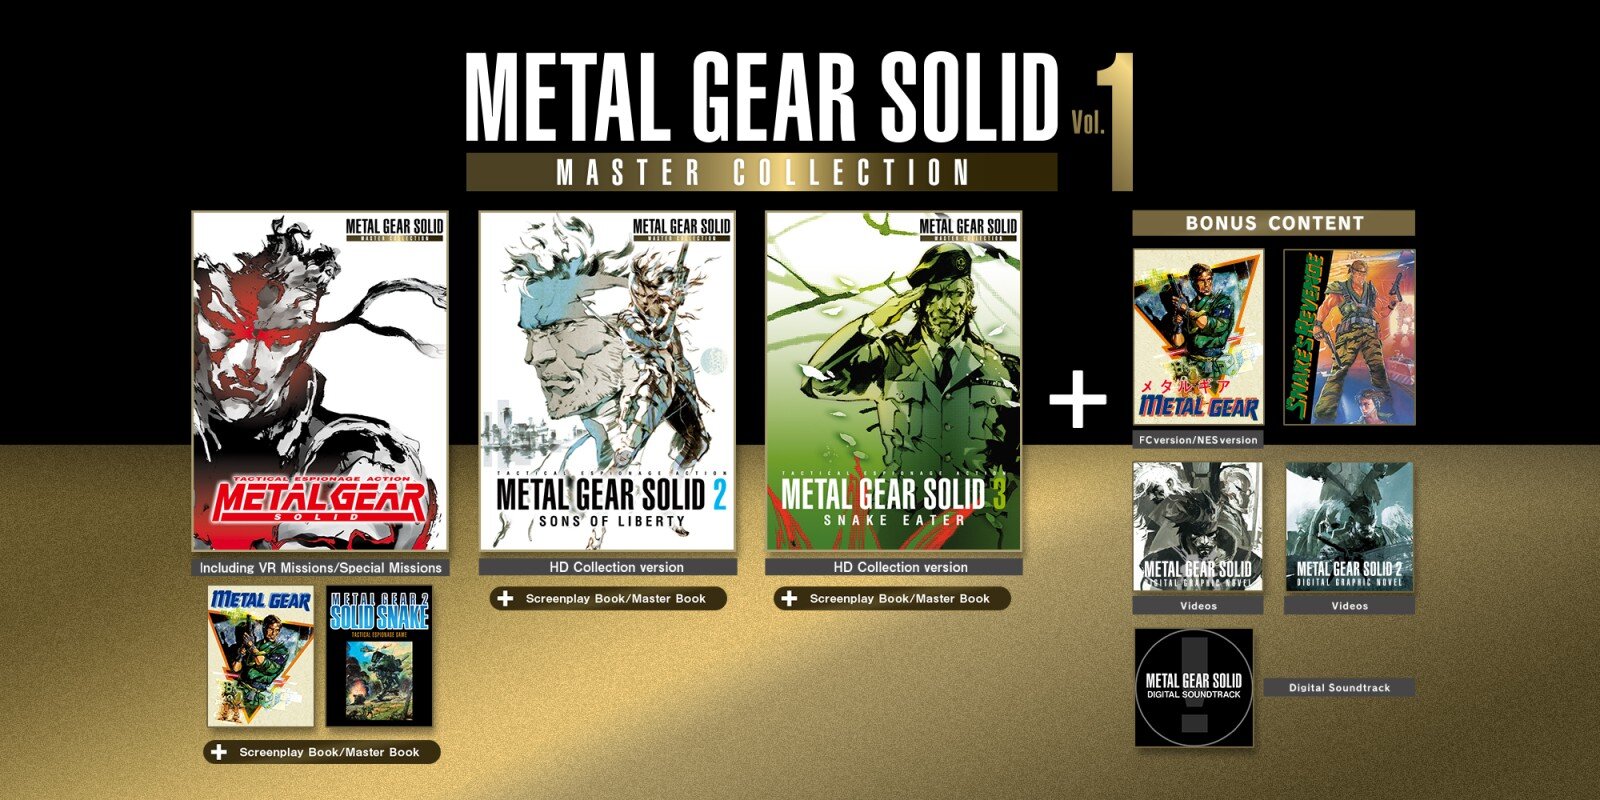 Metal Gear Solid Master Collection Vol 1 - Release Date